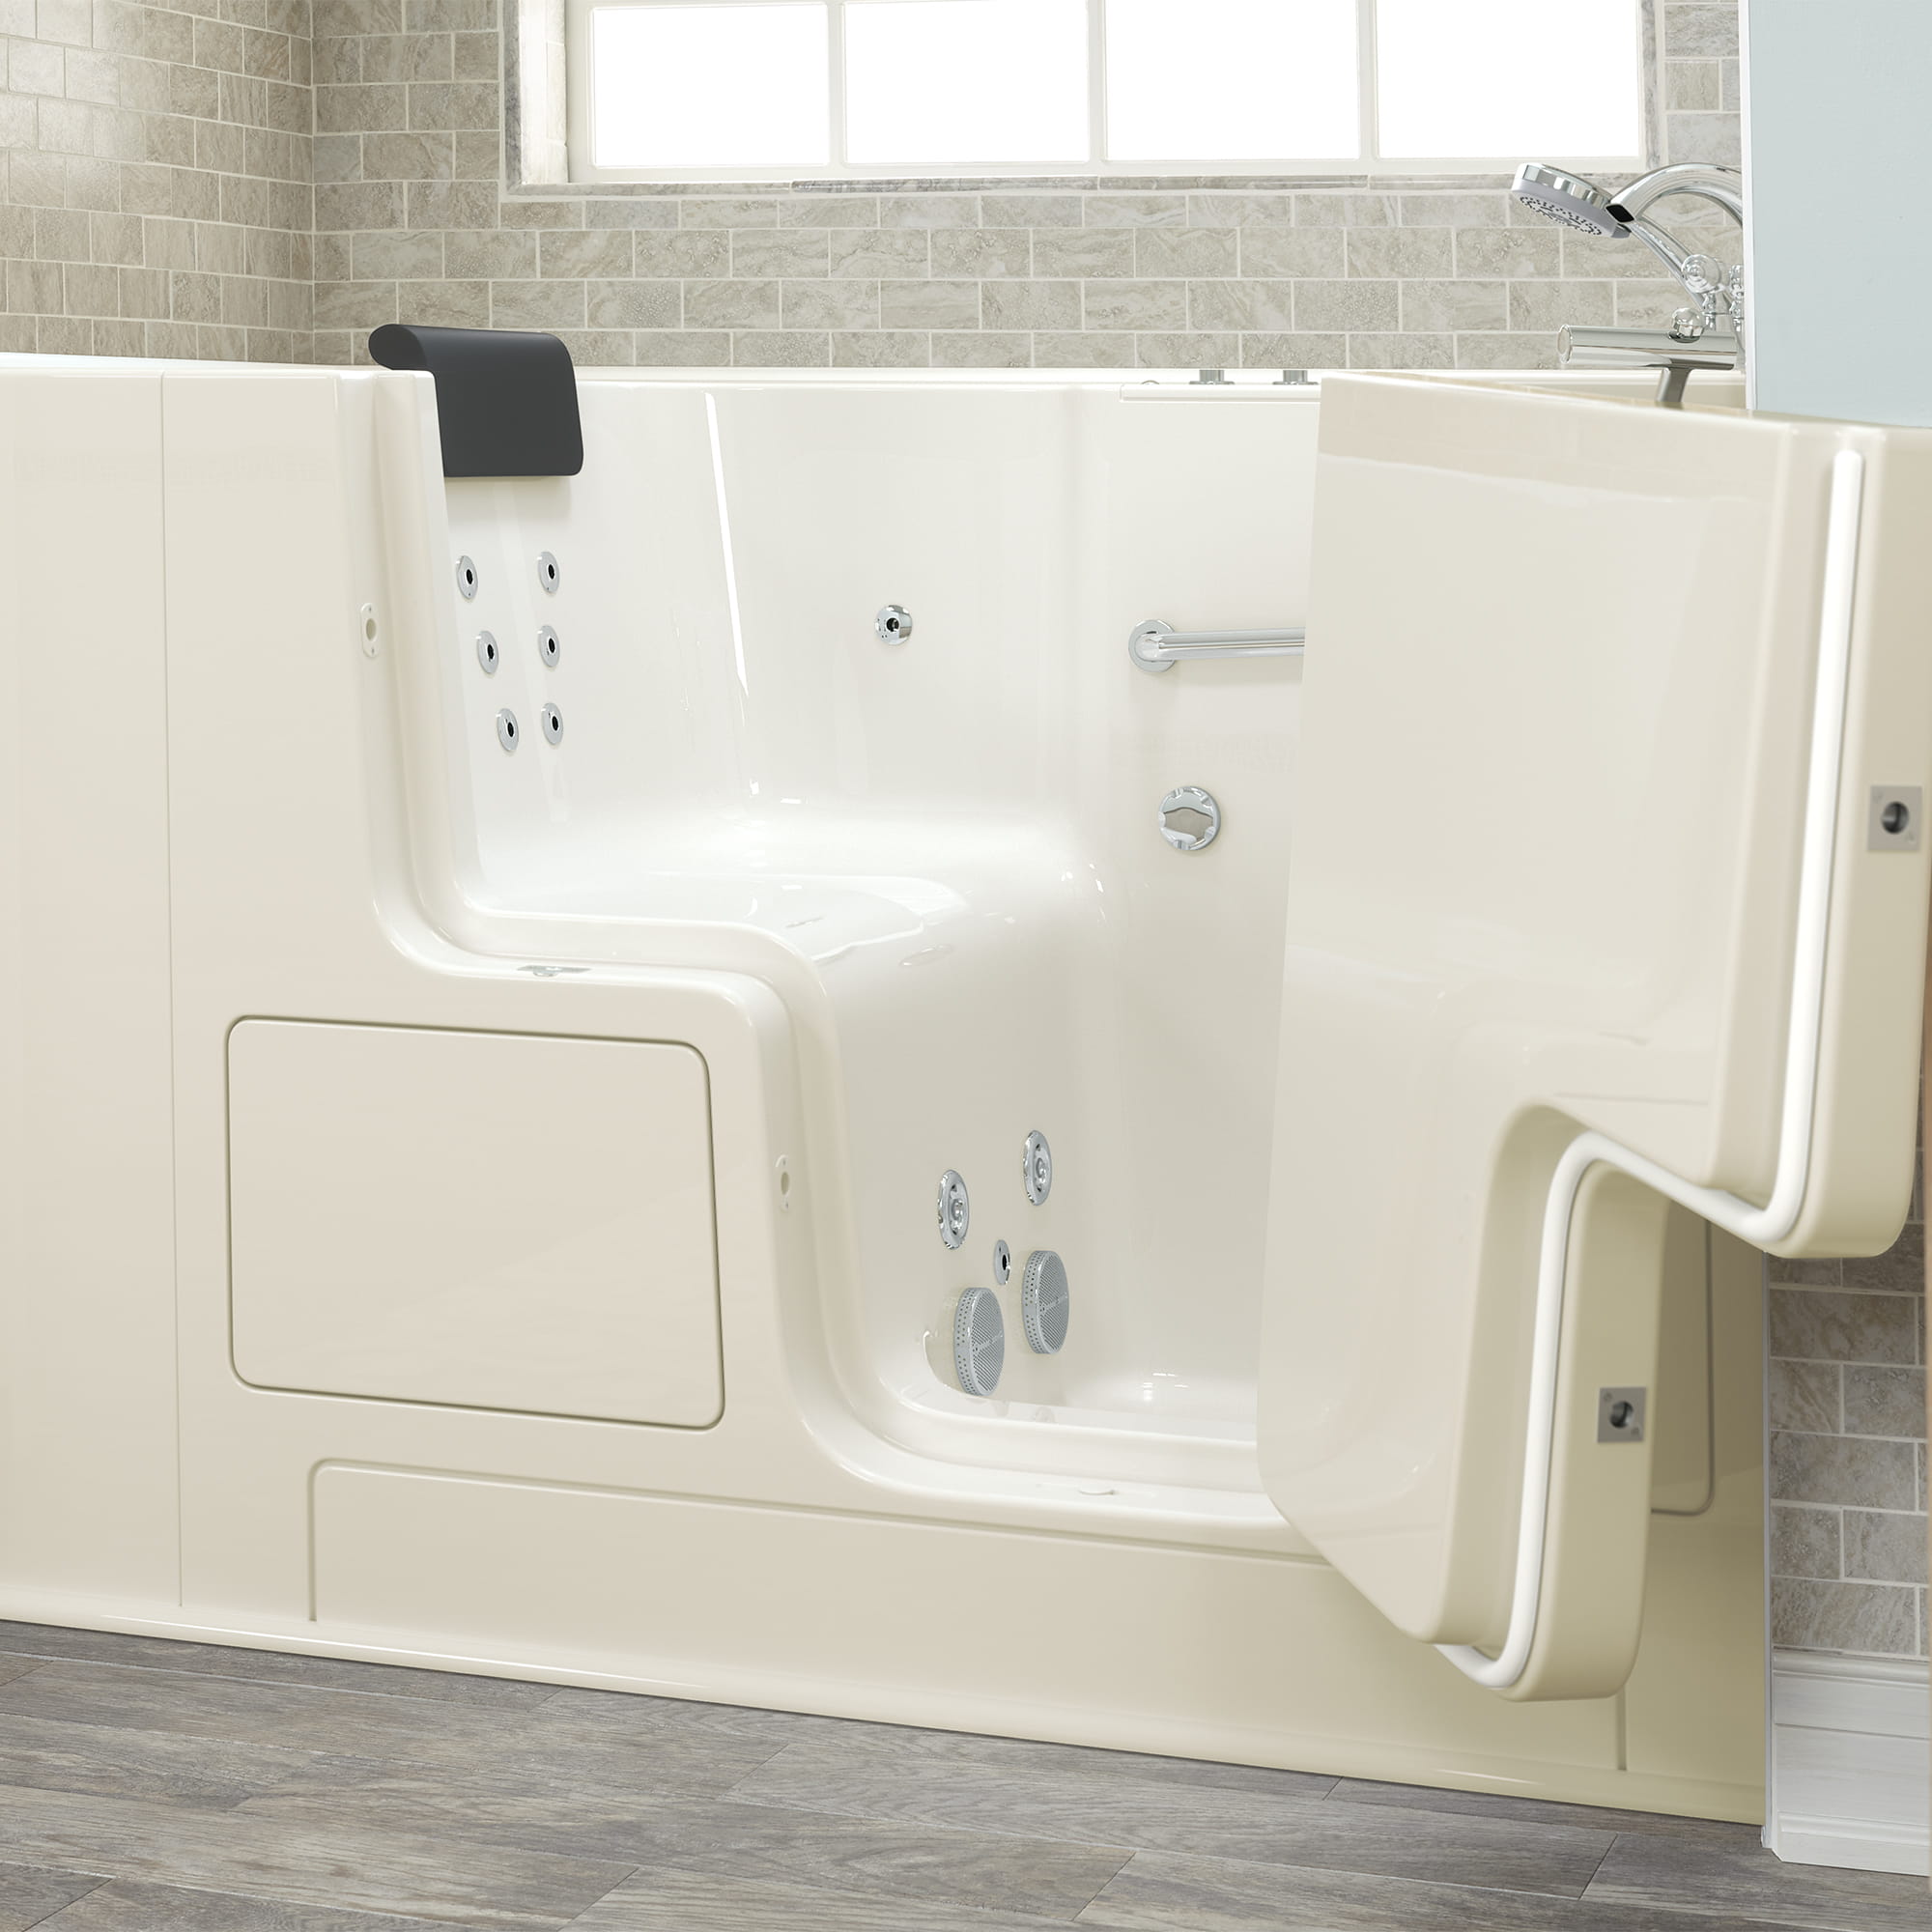 Gelcoat Premium Series 32 x 52 -Inch Walk-in Tub With Whirlpool System - Right-Hand Drain With Faucet